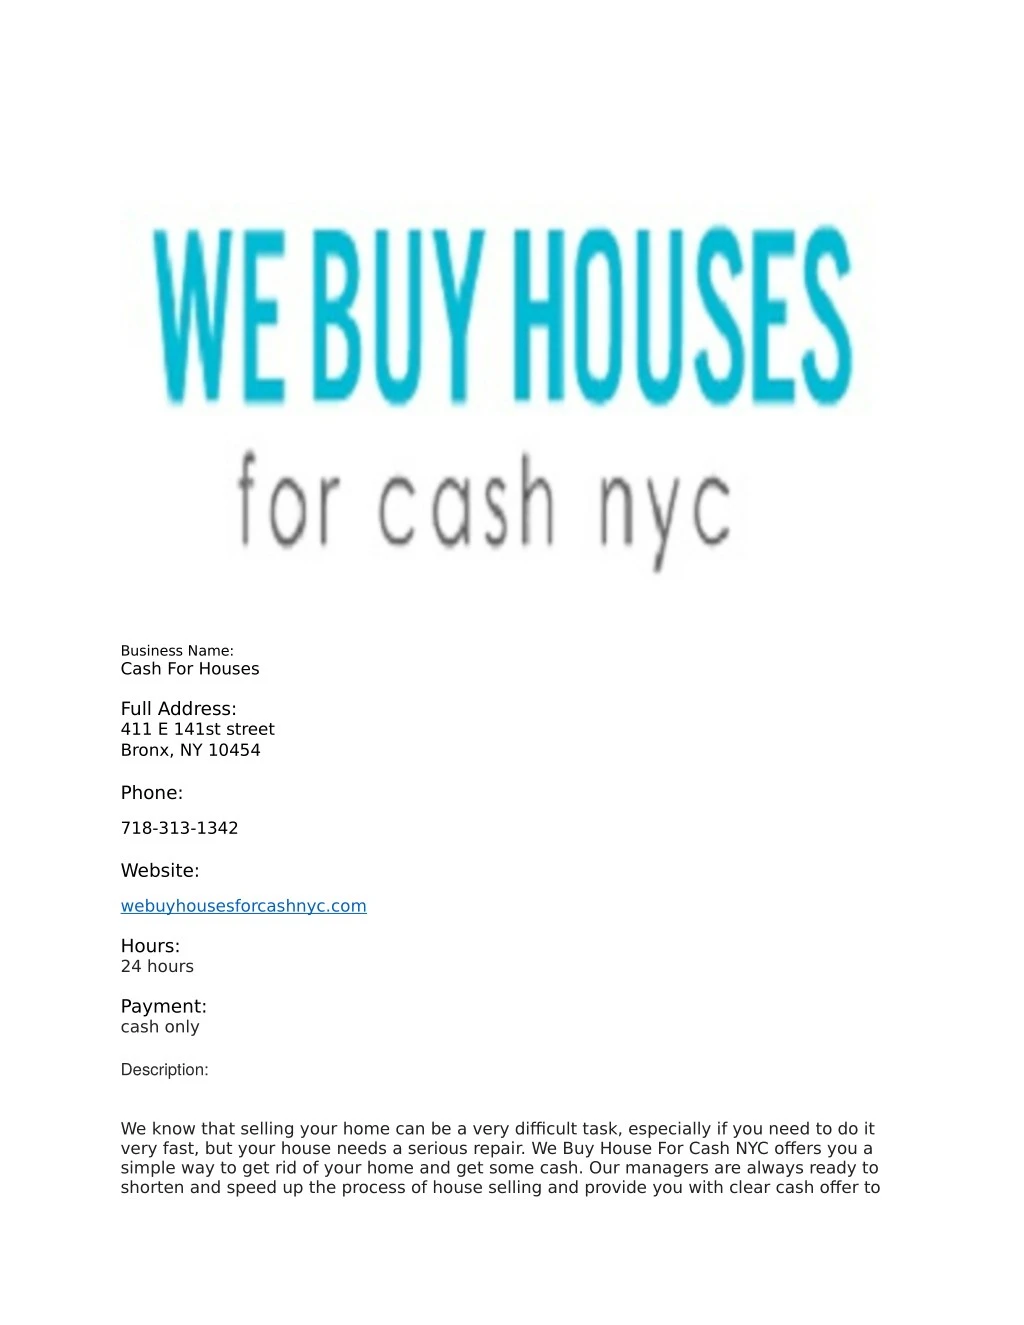 business name cash for houses